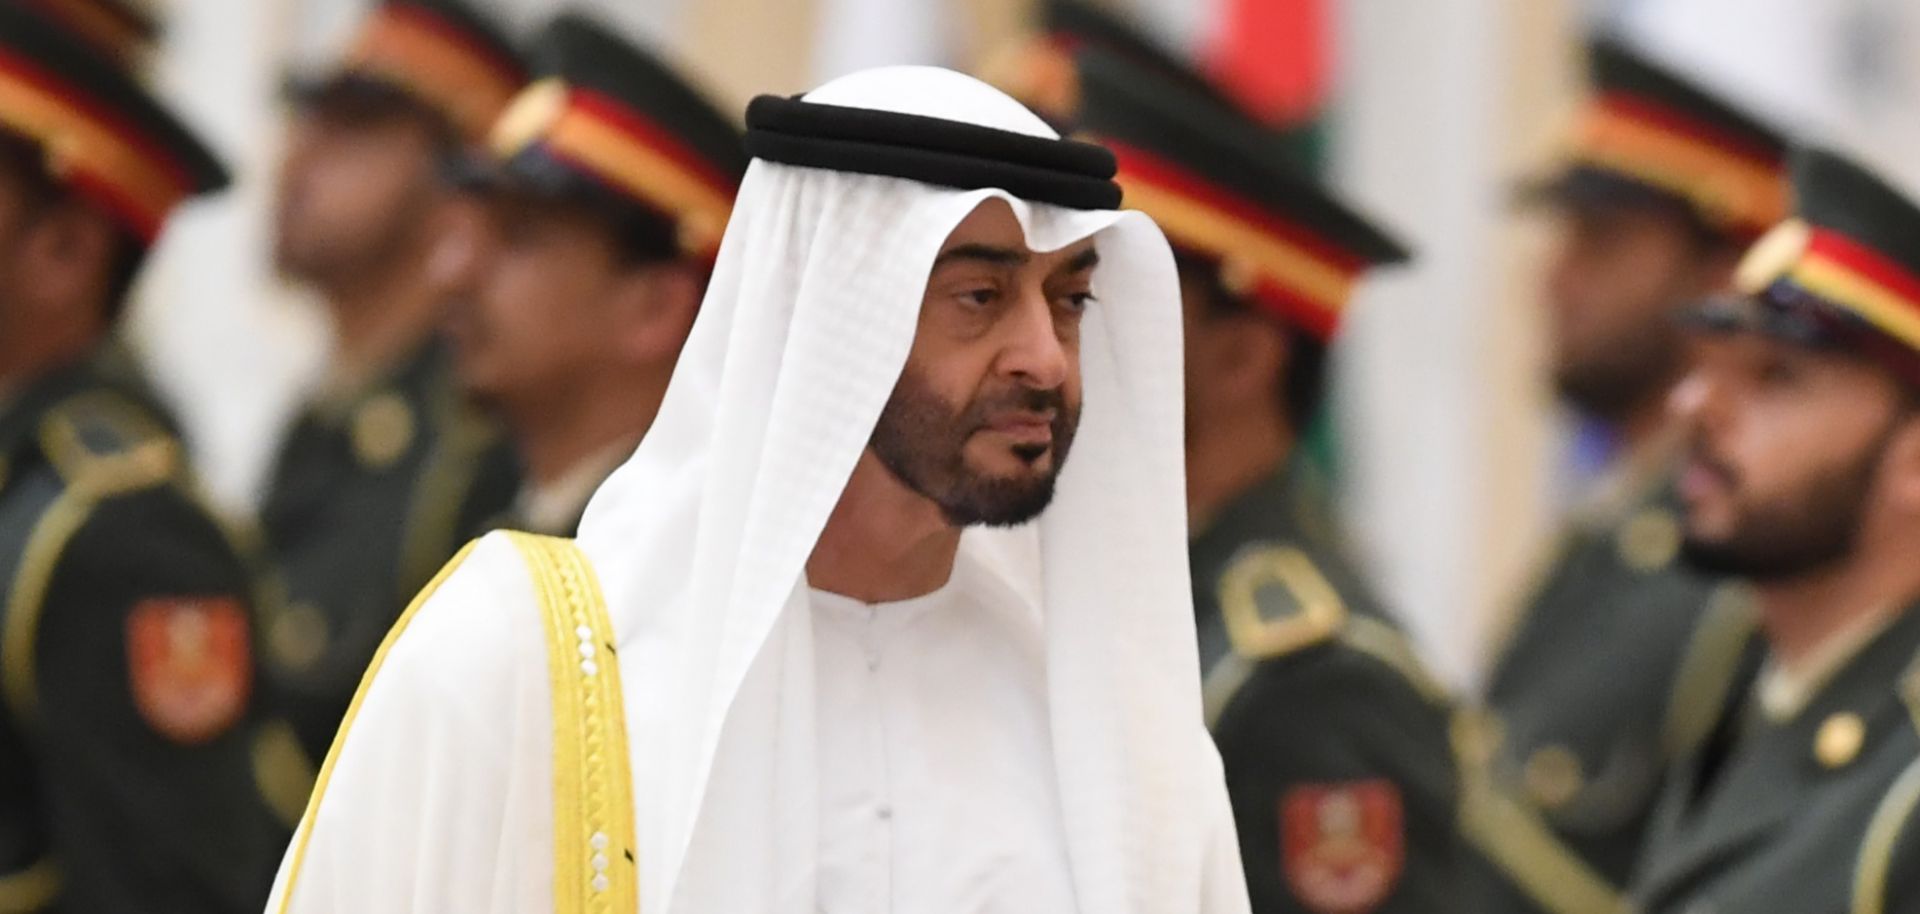 Sheikh Mohamed bin Zayed al-Nahyan, the crown prince of Abu Dhabi, during an official welcoming Oct. 15, 2019, in the Emirati capital's Al-Watan presidential palace.